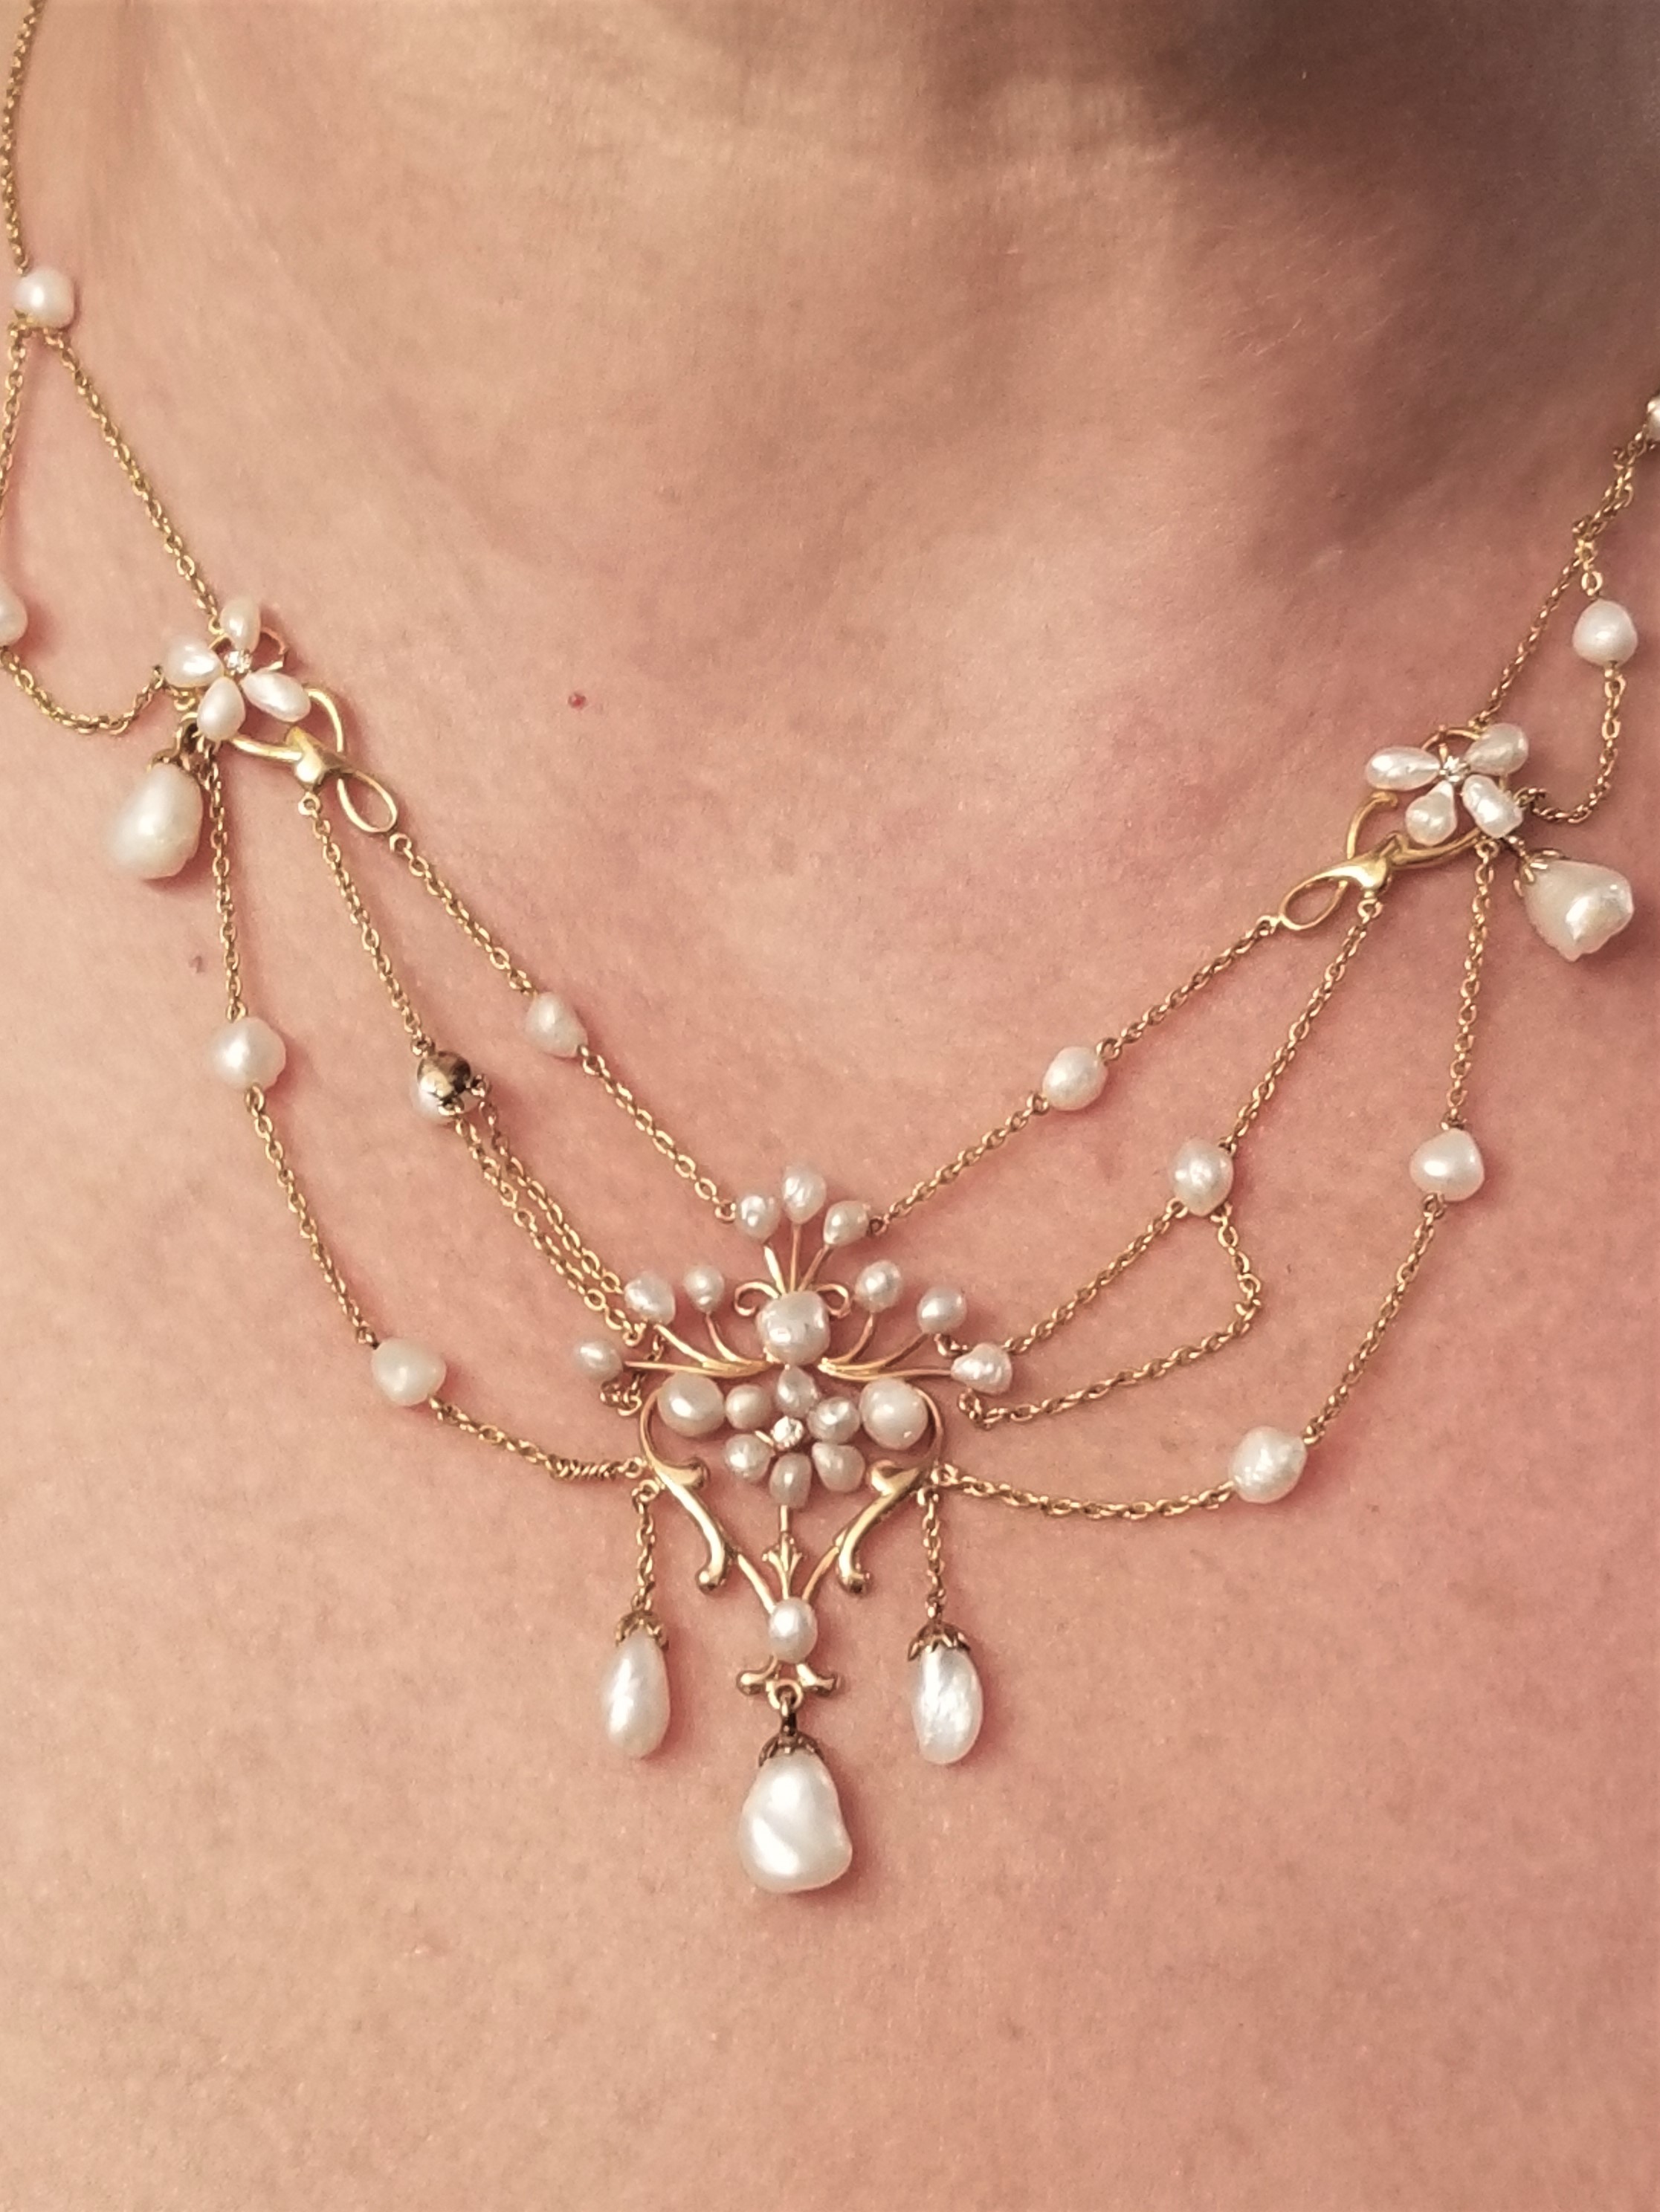 Mississippi River Pearl necklace